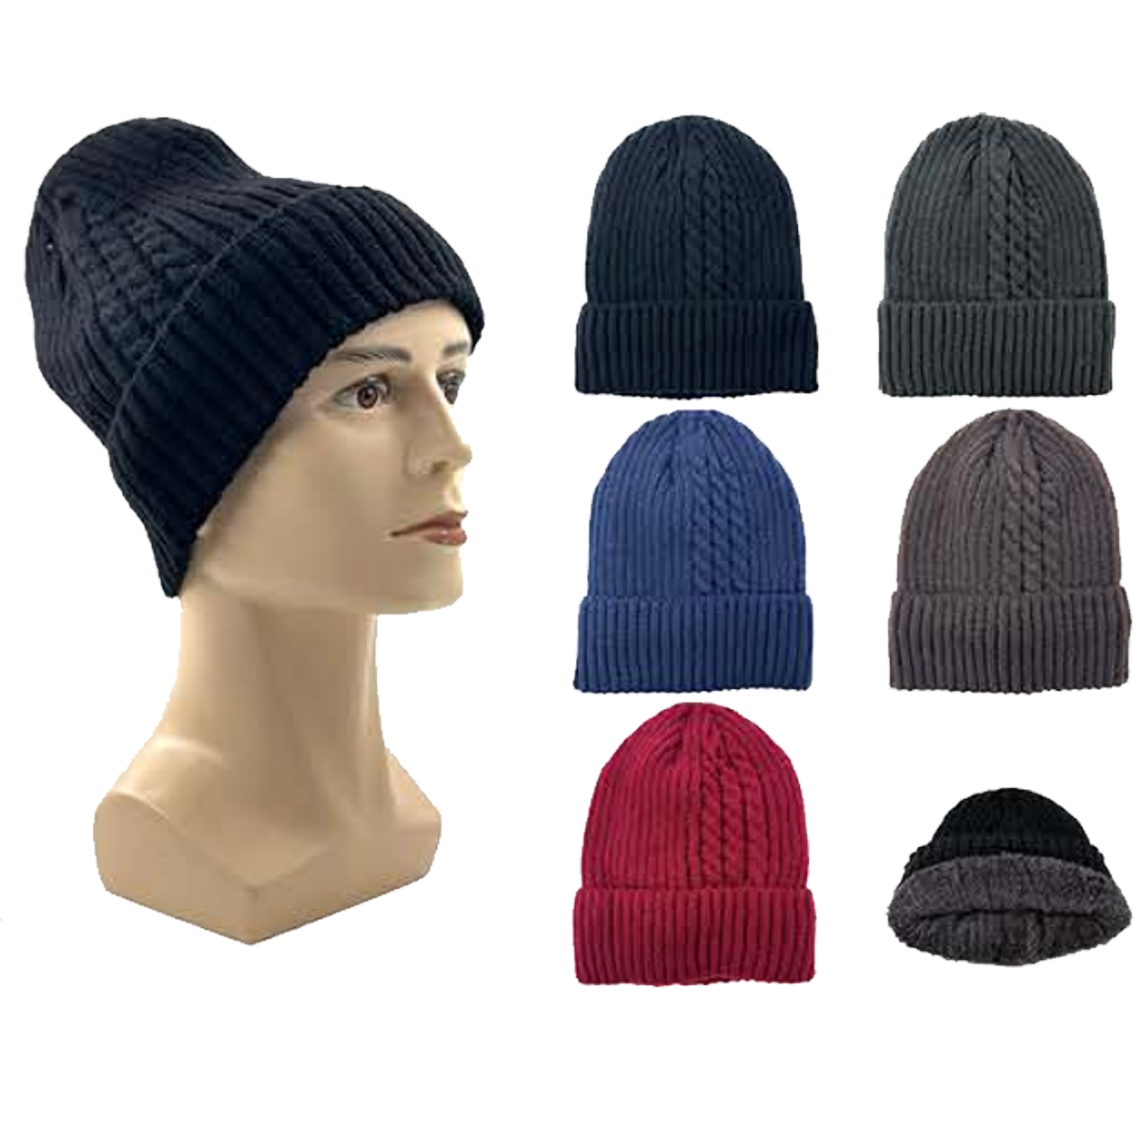 Wholesale Clothing Accessories 8-Word Flip-Up Men's Winter Hat NH237